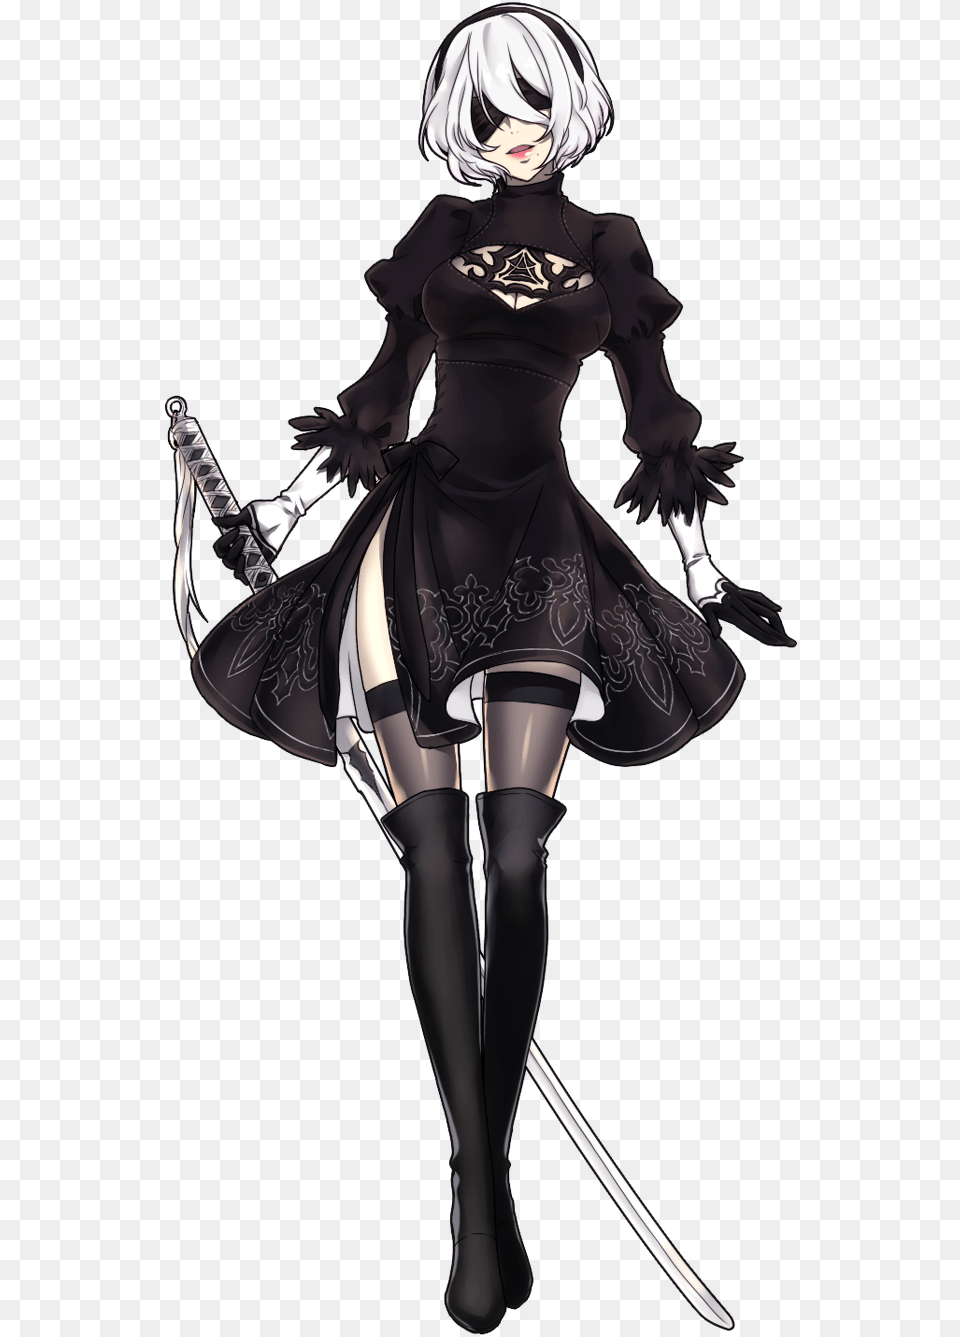 Nier Automata Nier Automata 2b Cosplay Costume, Adult, Weapon, Sword, Publication Png Image